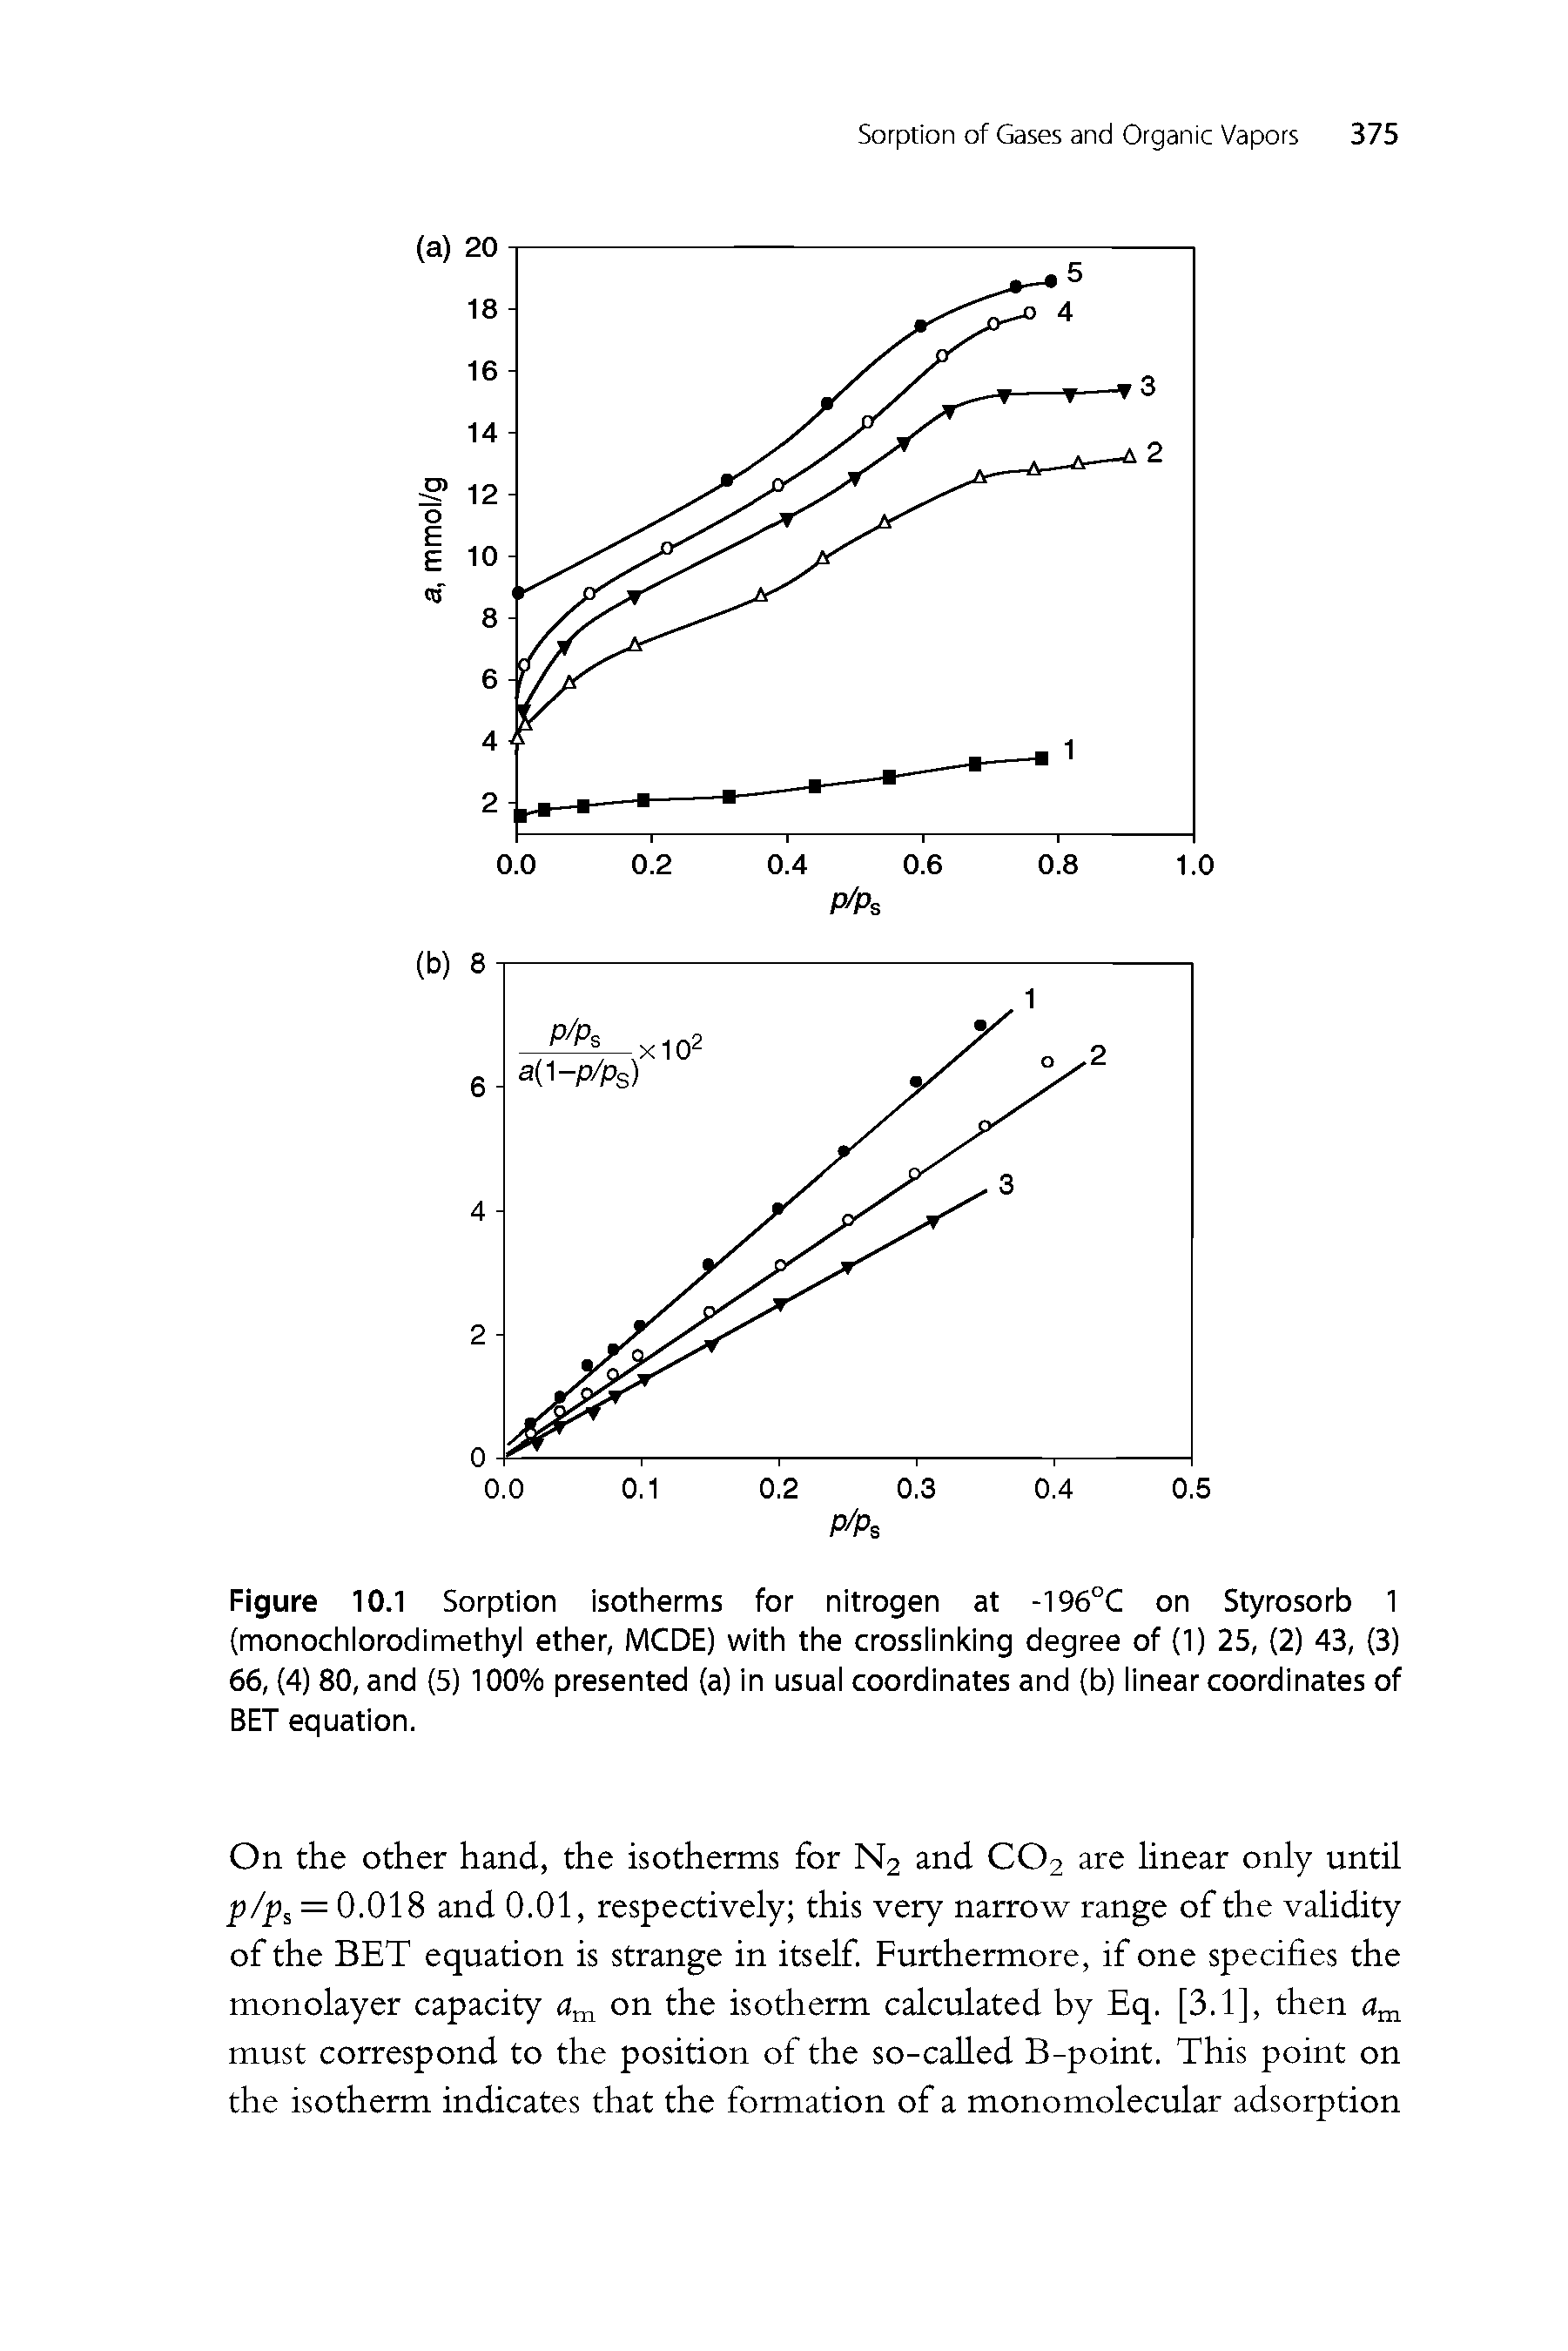 Figure 10.1 Sorption isotherms for nitrogen at -196°C on Styrosorb 1 (monochlorodimethyl ether, MCDE) with the crossiinking degree of (1) 25, (2) 43, (3) 66, (4) 80, and (5) 100% presented (a) in usuai coordinates and (b) iinear coordinates of BET equation.